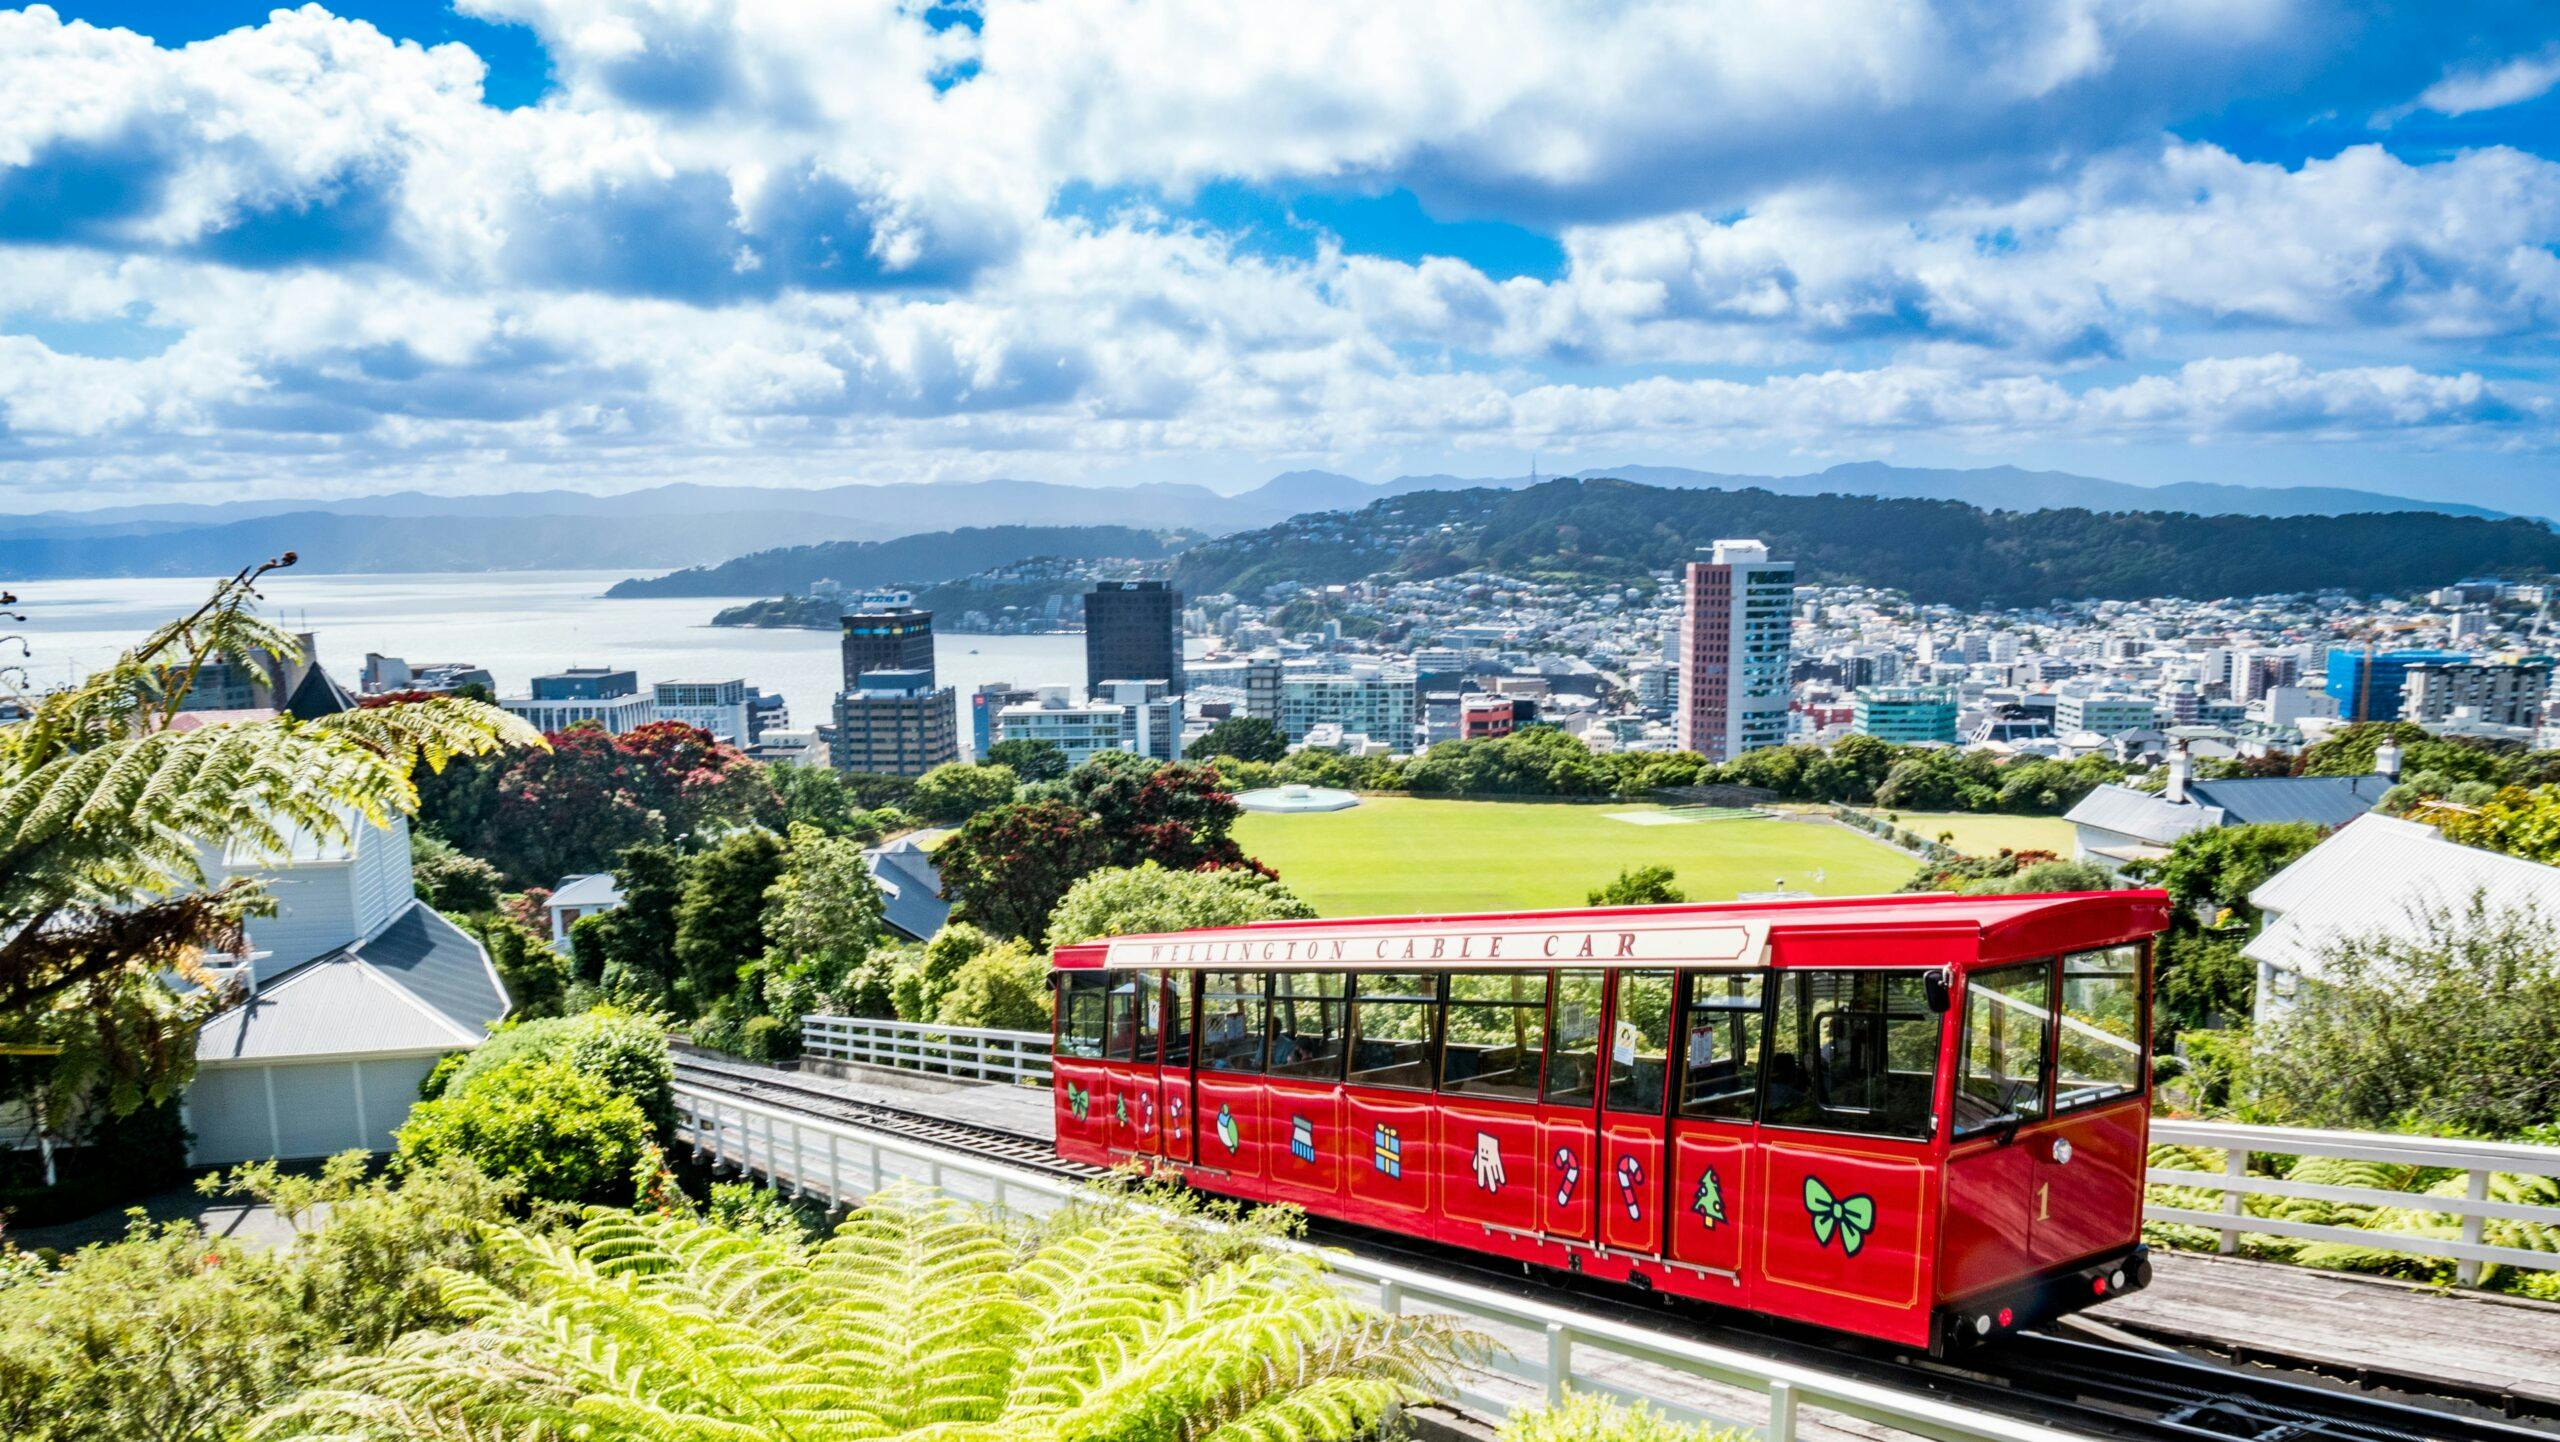 seeing a red trolley on a track with city of Wellington in the background in New Zealand, Europe